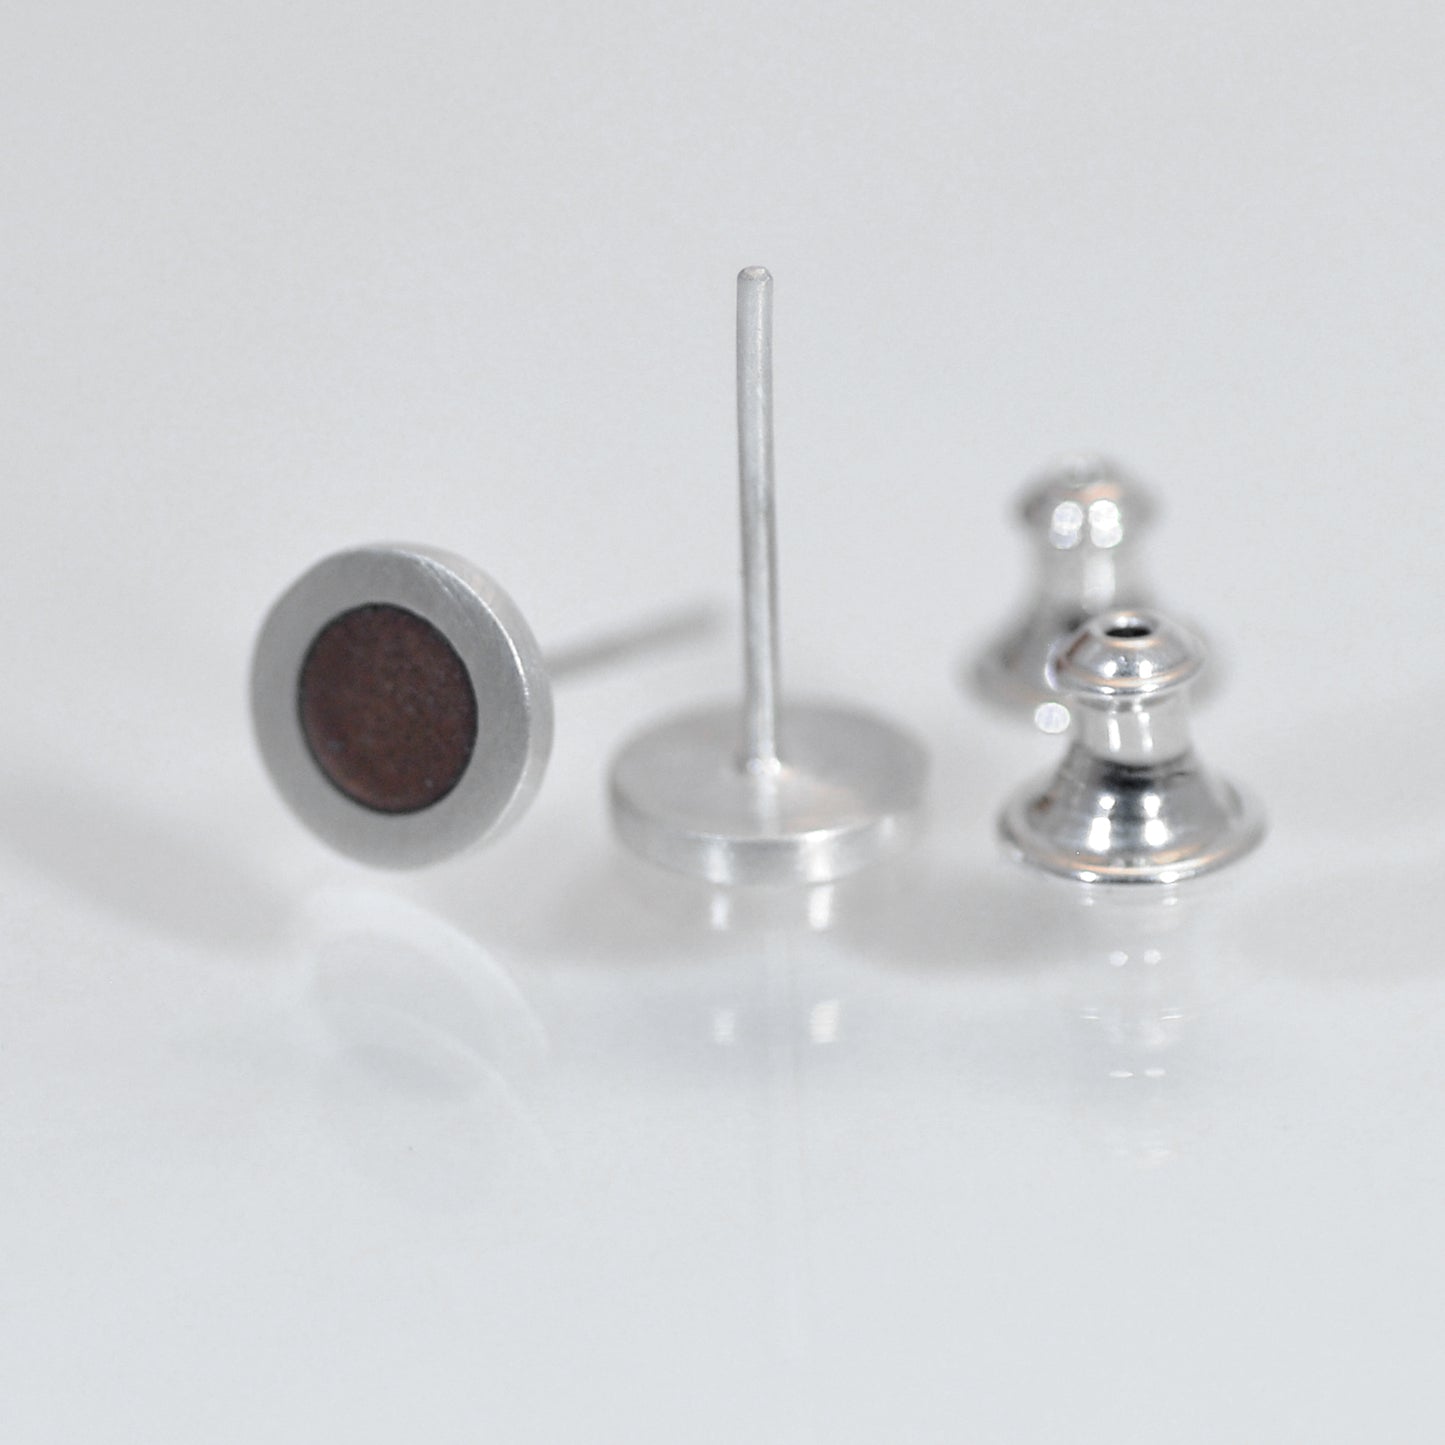 Small round silver flat ear studs, brown